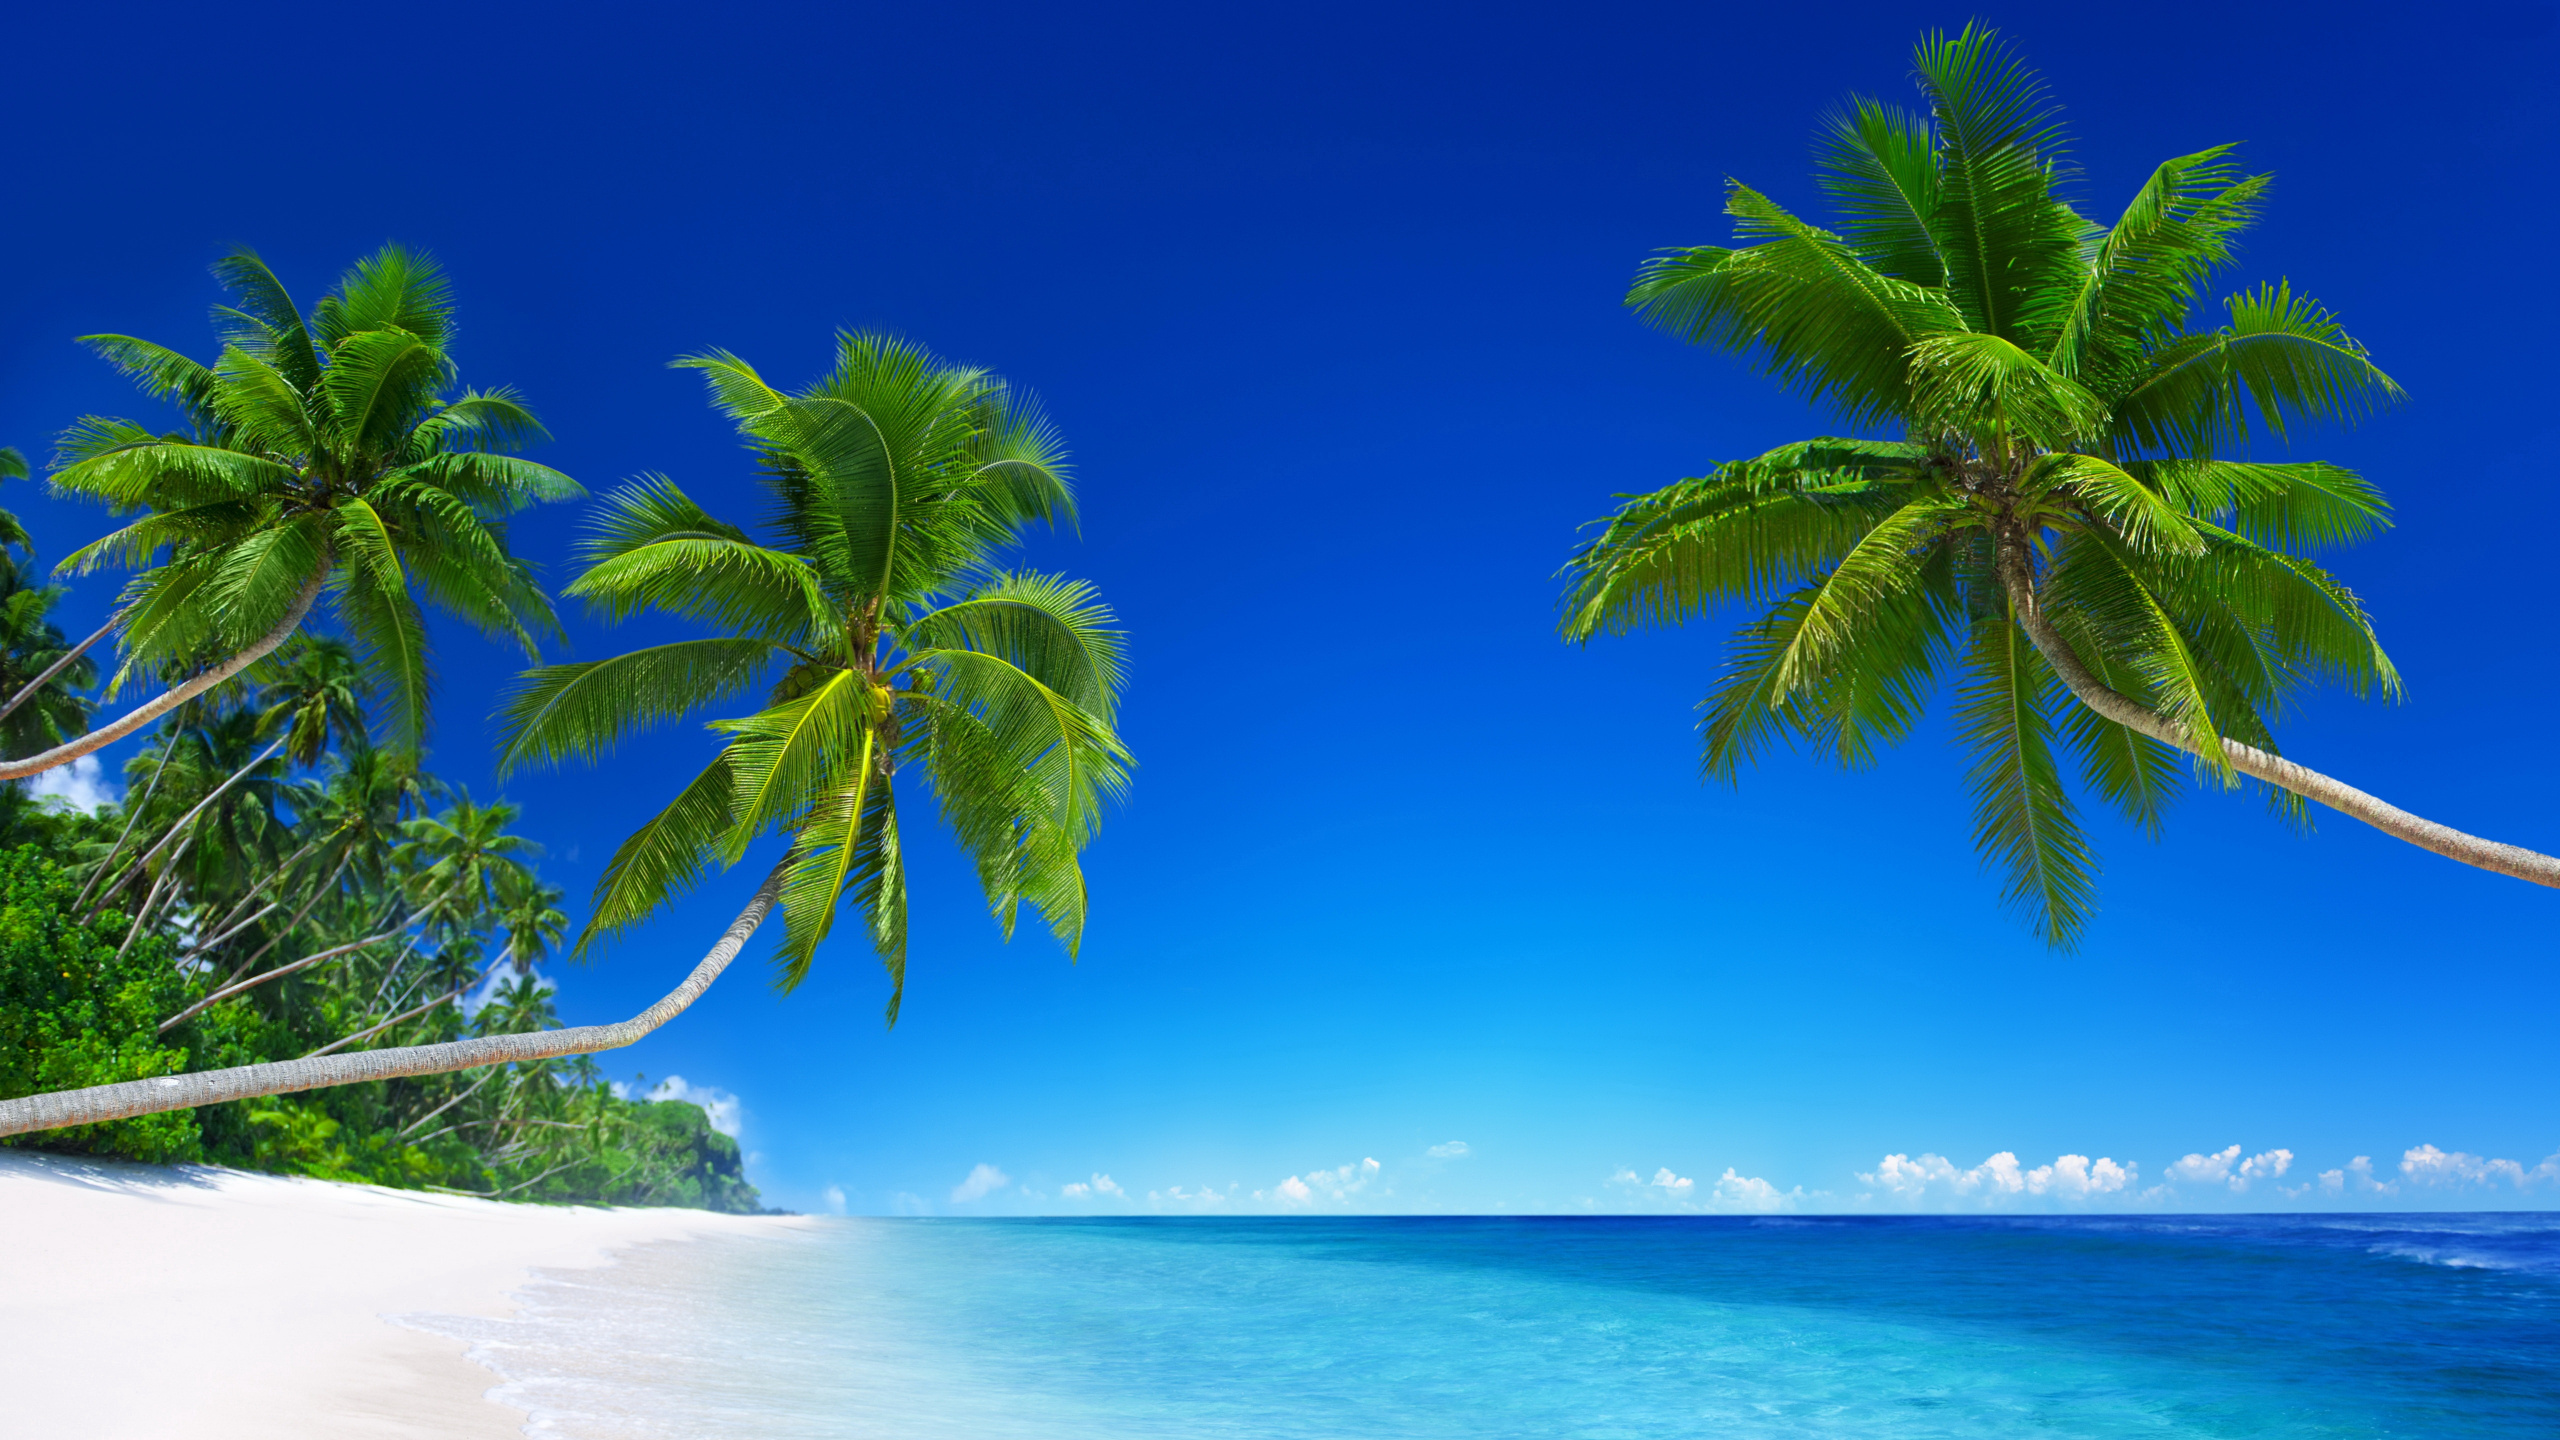 Green Palm Tree on White Sand Beach During Daytime. Wallpaper in 2560x1440 Resolution